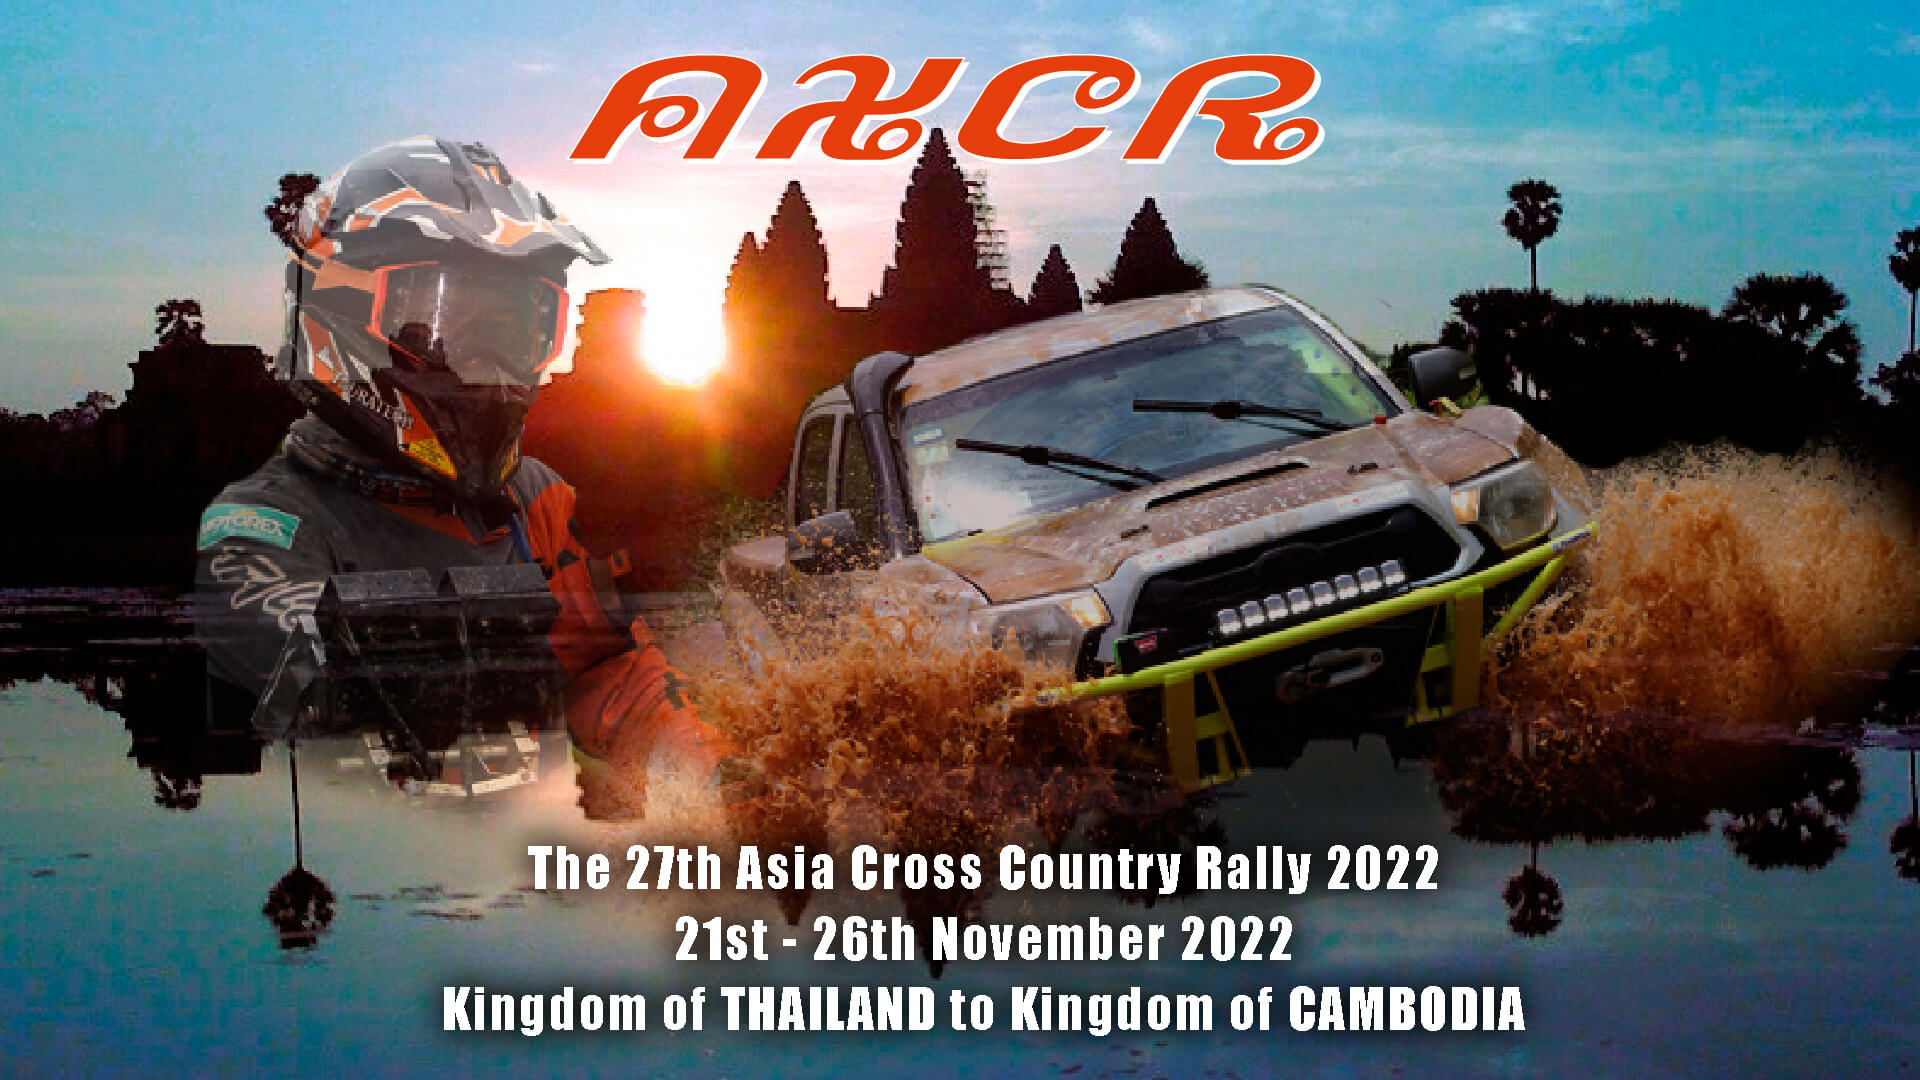 The 27th Asia Cross Country Rally 2022